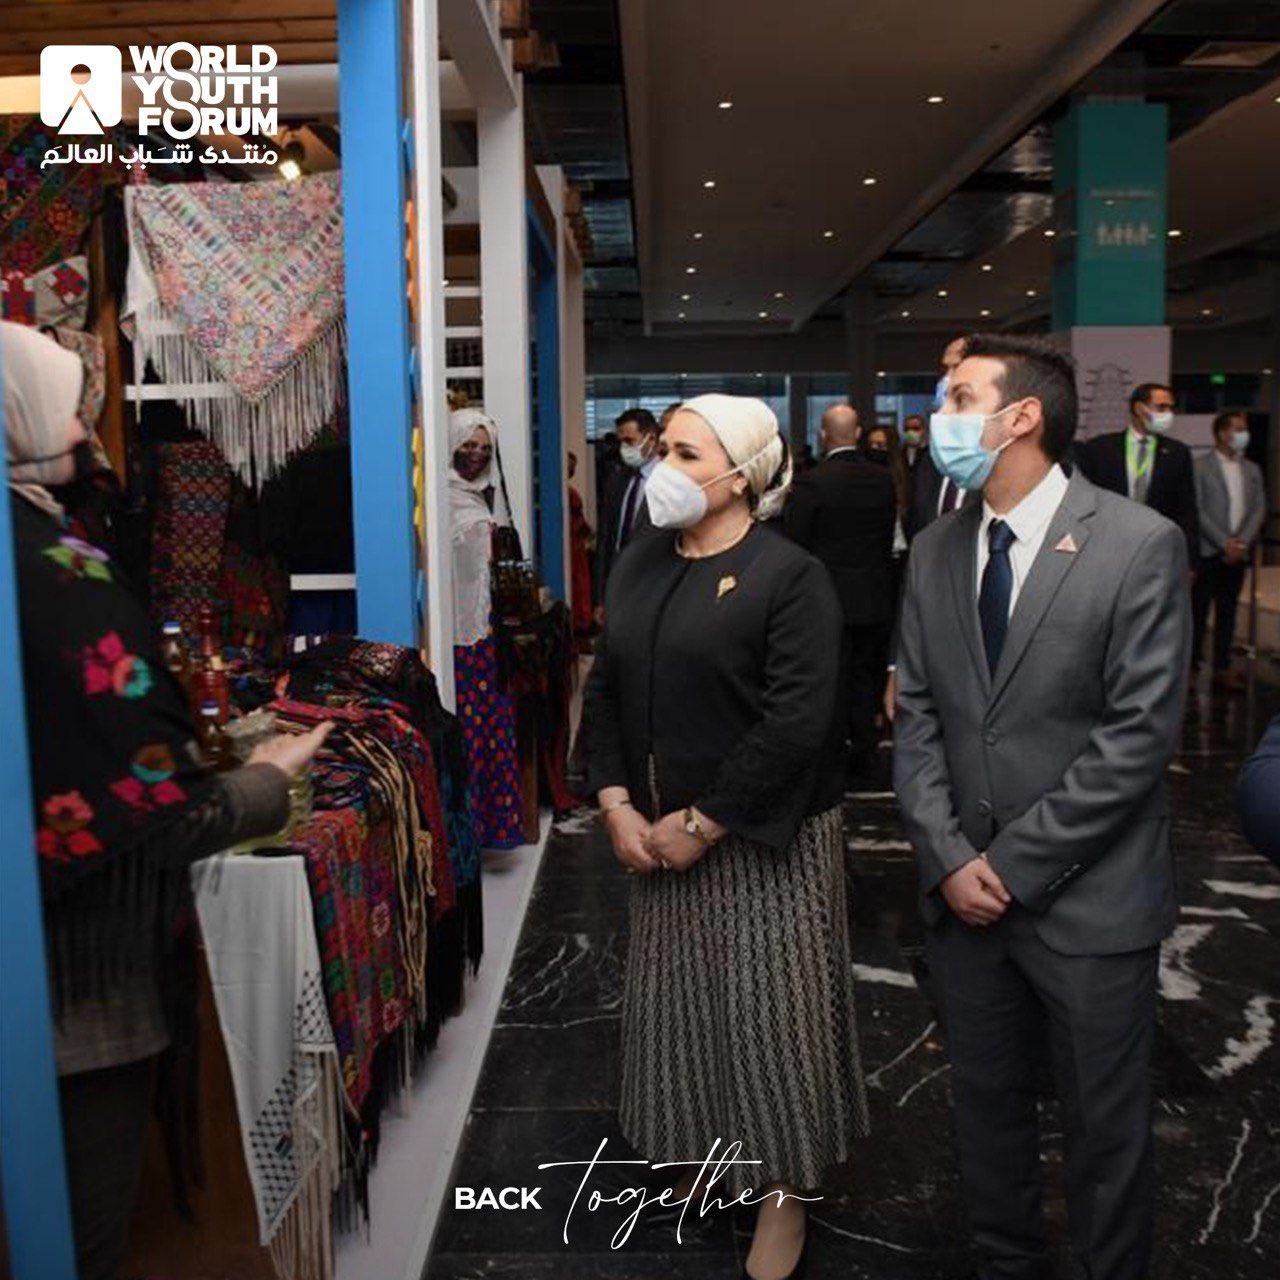 Mrs. Intisar El-Sisi takes a look at some of the exhibits